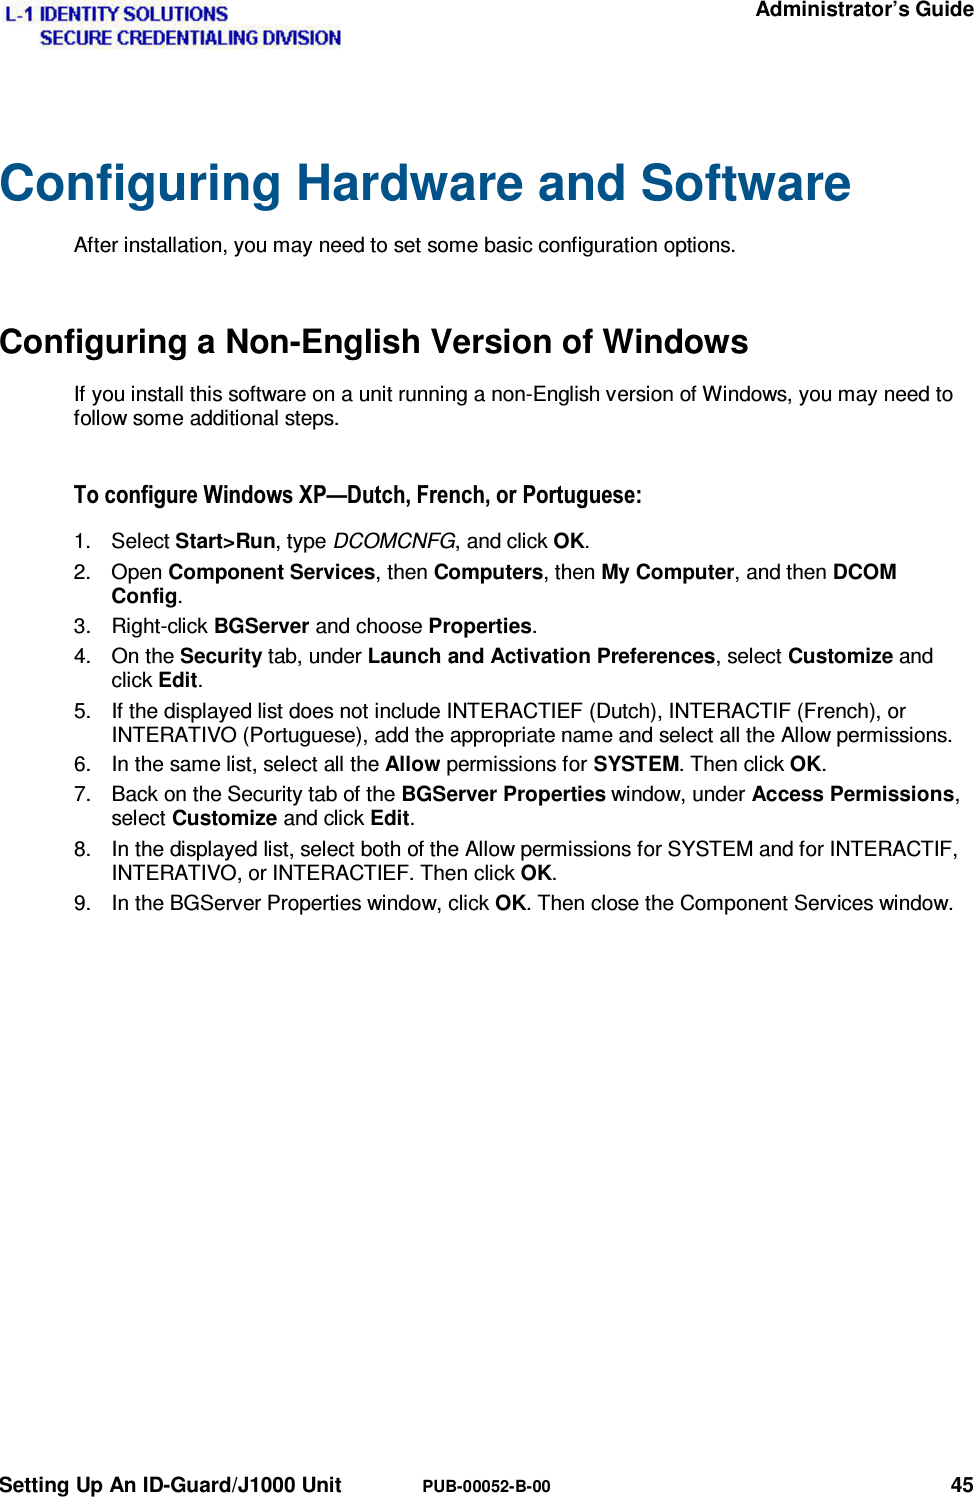   Administrator’s Guide Setting Up An ID-Guard/J1000 Unit  PUB-00052-B-00 45 Configuring Hardware and Software After installation, you may need to set some basic configuration options. Configuring a Non-English Version of Windows If you install this software on a unit running a non-English version of Windows, you may need to follow some additional steps. 7RFRQILJXUH:LQGRZV;3³&apos;XWFK)UHQFKRU3RUWXJXHVH1. Select Start&gt;Run, type DCOMCNFG, and click OK. 2. Open Component Services, then Computers, then My Computer, and then DCOM Config. 3. Right-click BGServer and choose Properties. 4. On the Security tab, under Launch and Activation Preferences, select Customize and click Edit. 5.  If the displayed list does not include INTERACTIEF (Dutch), INTERACTIF (French), or INTERATIVO (Portuguese), add the appropriate name and select all the Allow permissions. 6.  In the same list, select all the Allow permissions for SYSTEM. Then click OK. 7.  Back on the Security tab of the BGServer Properties window, under Access Permissions, select Customize and click Edit. 8.  In the displayed list, select both of the Allow permissions for SYSTEM and for INTERACTIF, INTERATIVO, or INTERACTIEF. Then click OK. 9.  In the BGServer Properties window, click OK. Then close the Component Services window. 